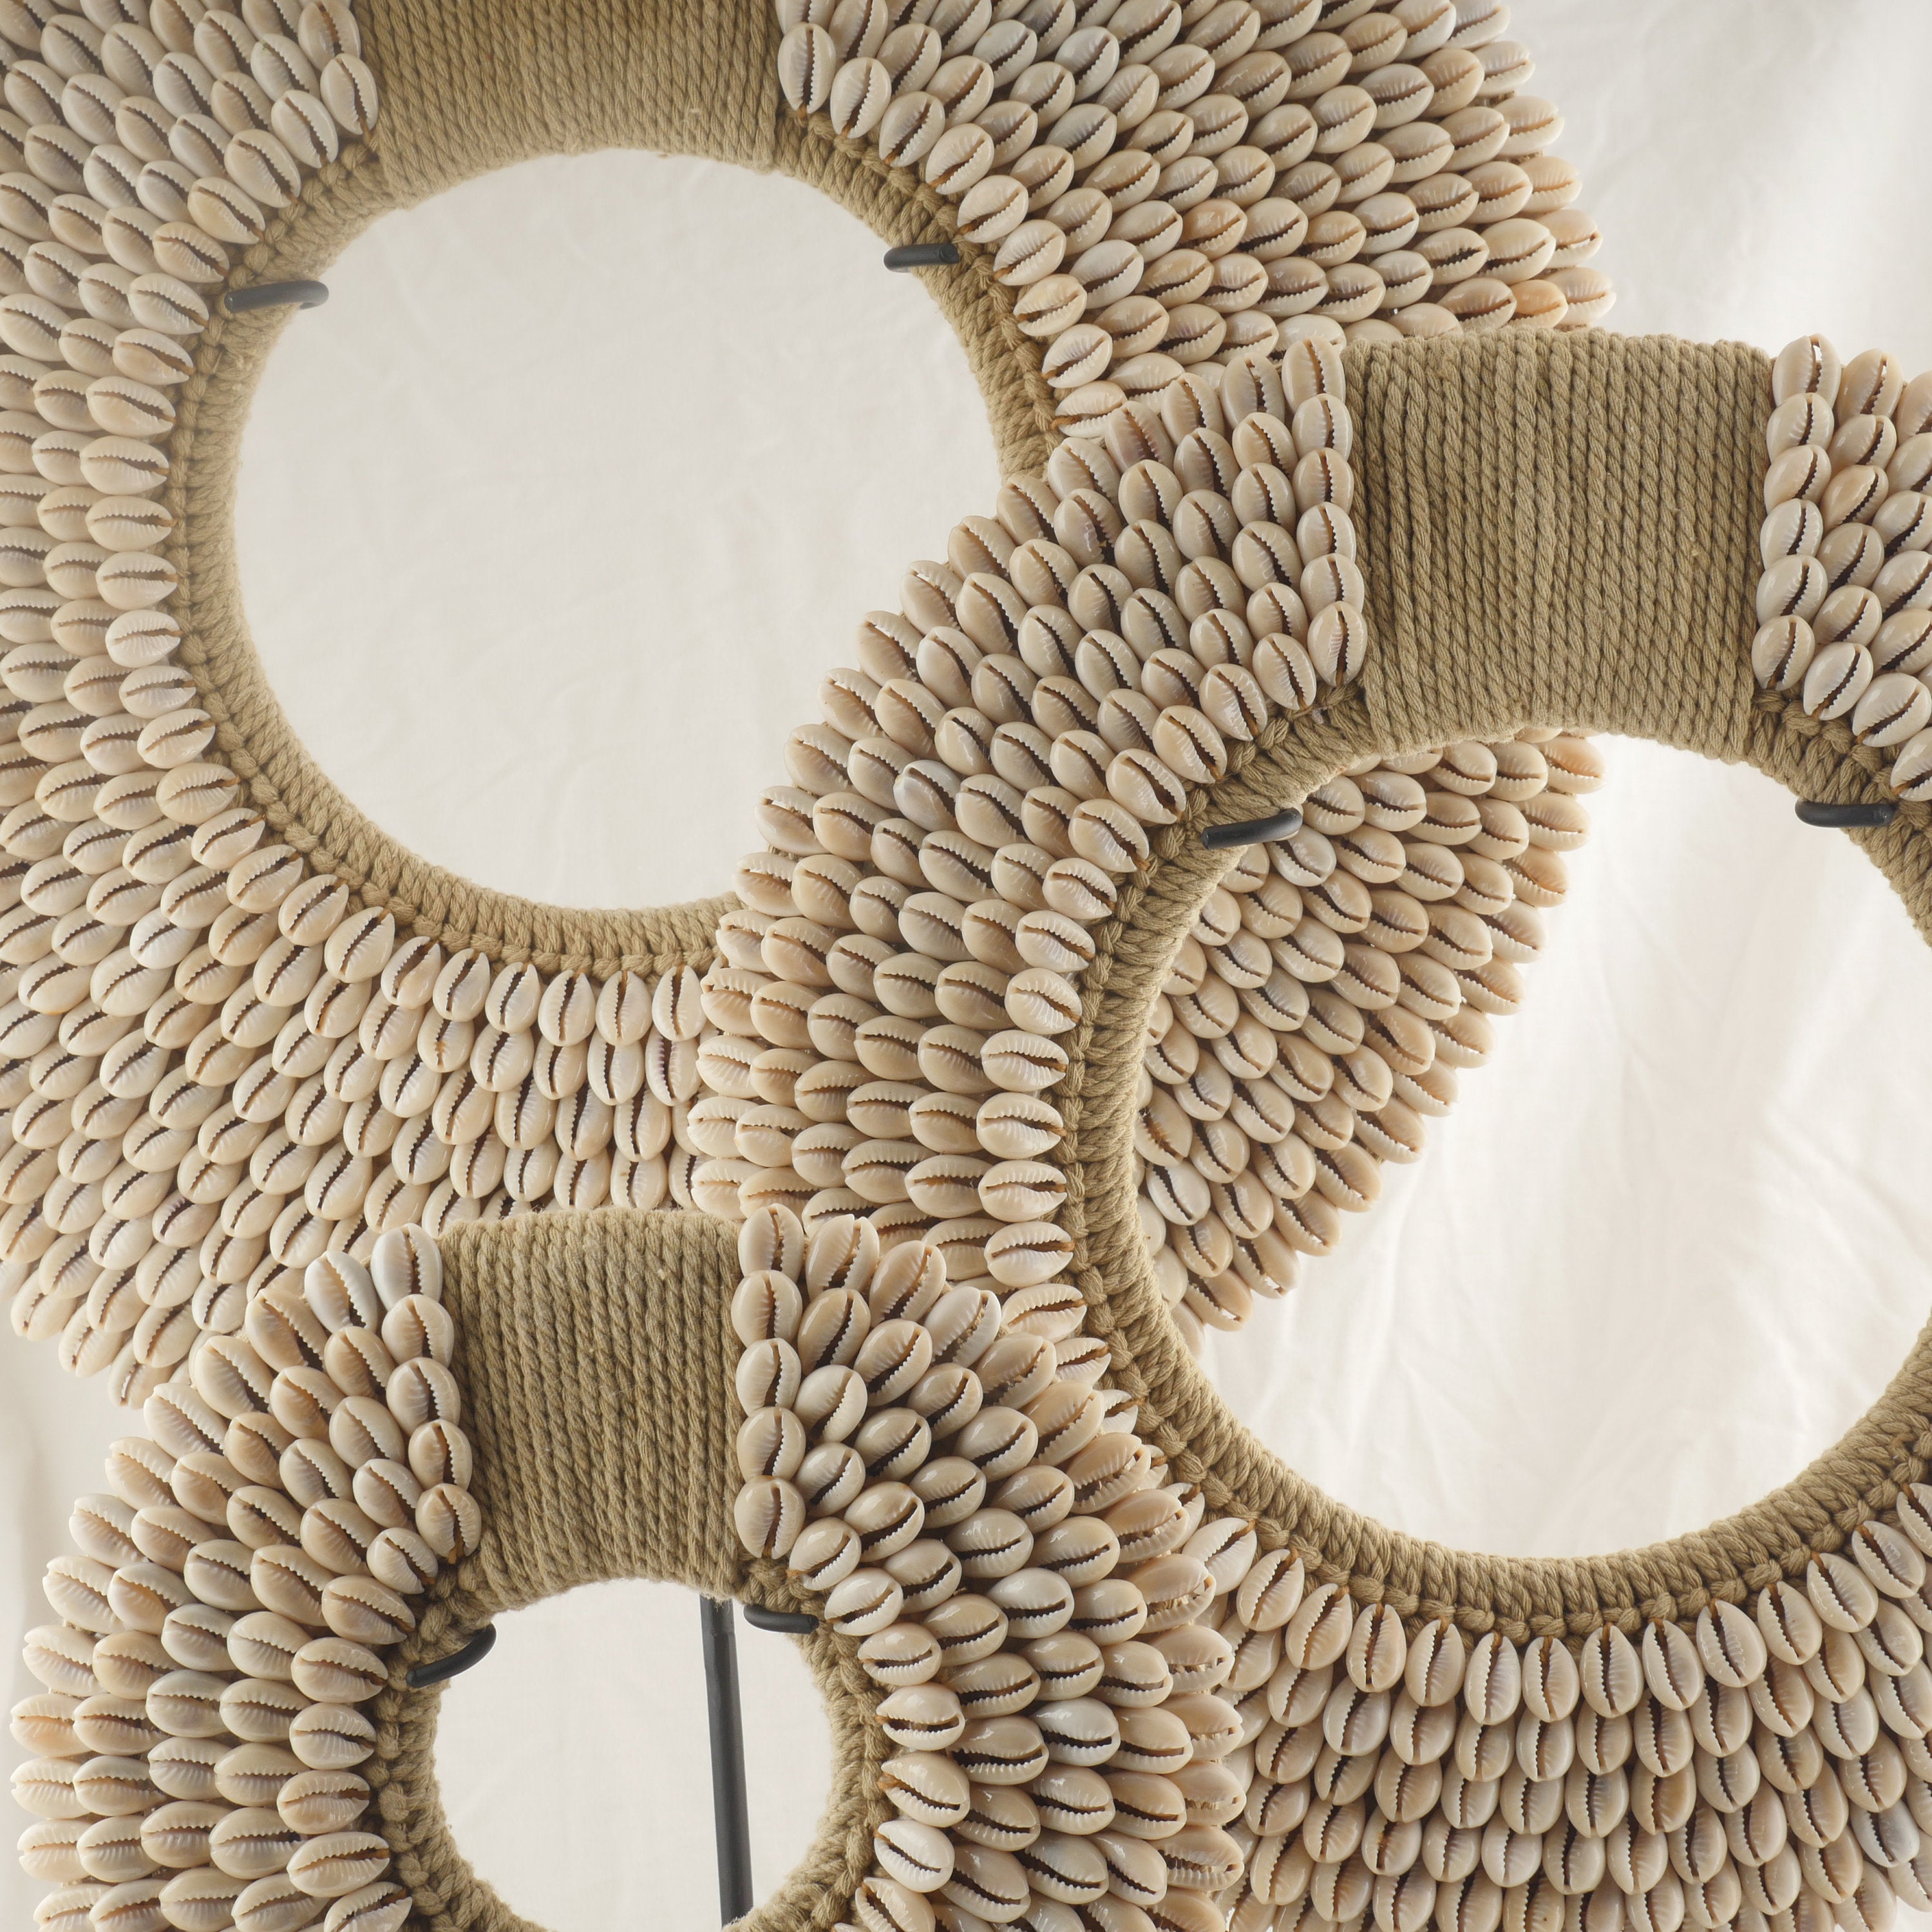 Traditional Papua Necklace Art Stand – Made with Cowrie Shells and Cotton Macramé Yarn; Tribal Necklace Display Sculpture for Table, Mantel